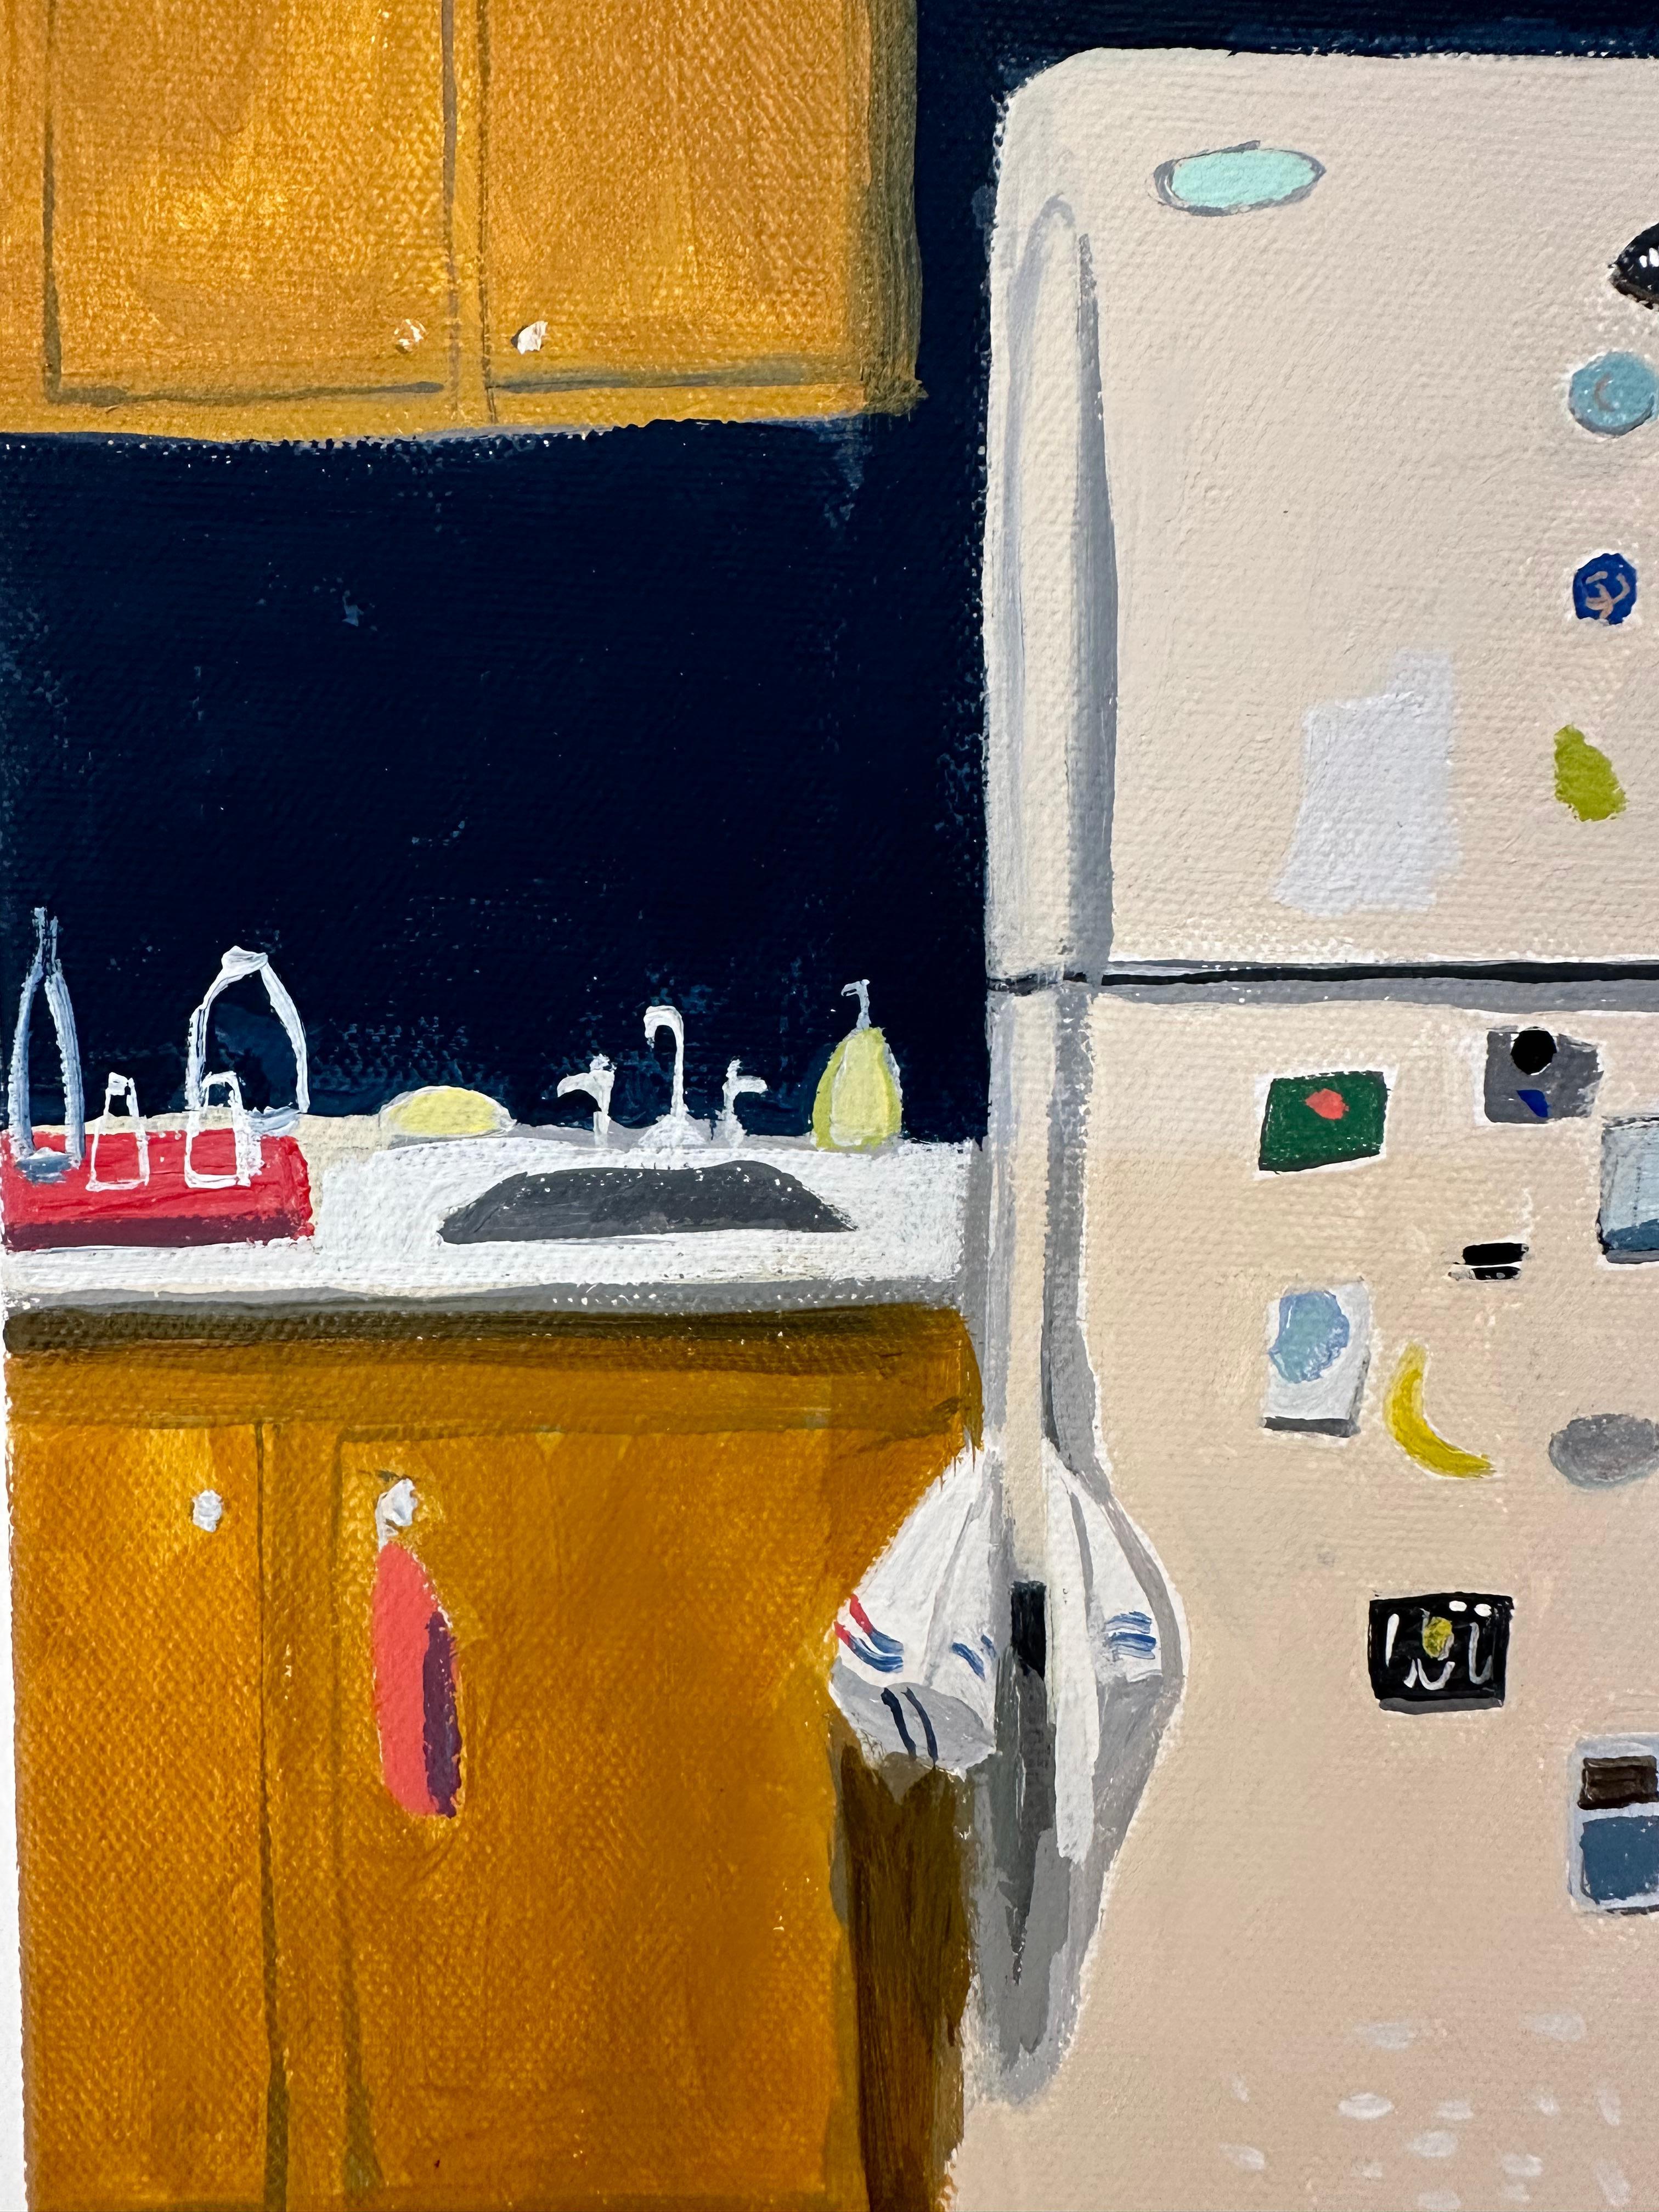 A refrigerator with assorted magnets stands next to a microwave, toaster oven and blender, surrounded by wooden cabinets in a kitchen with a blue and ivory tiled floor.

In her work, Polly Shindler is always thinking about the psychology of a place.